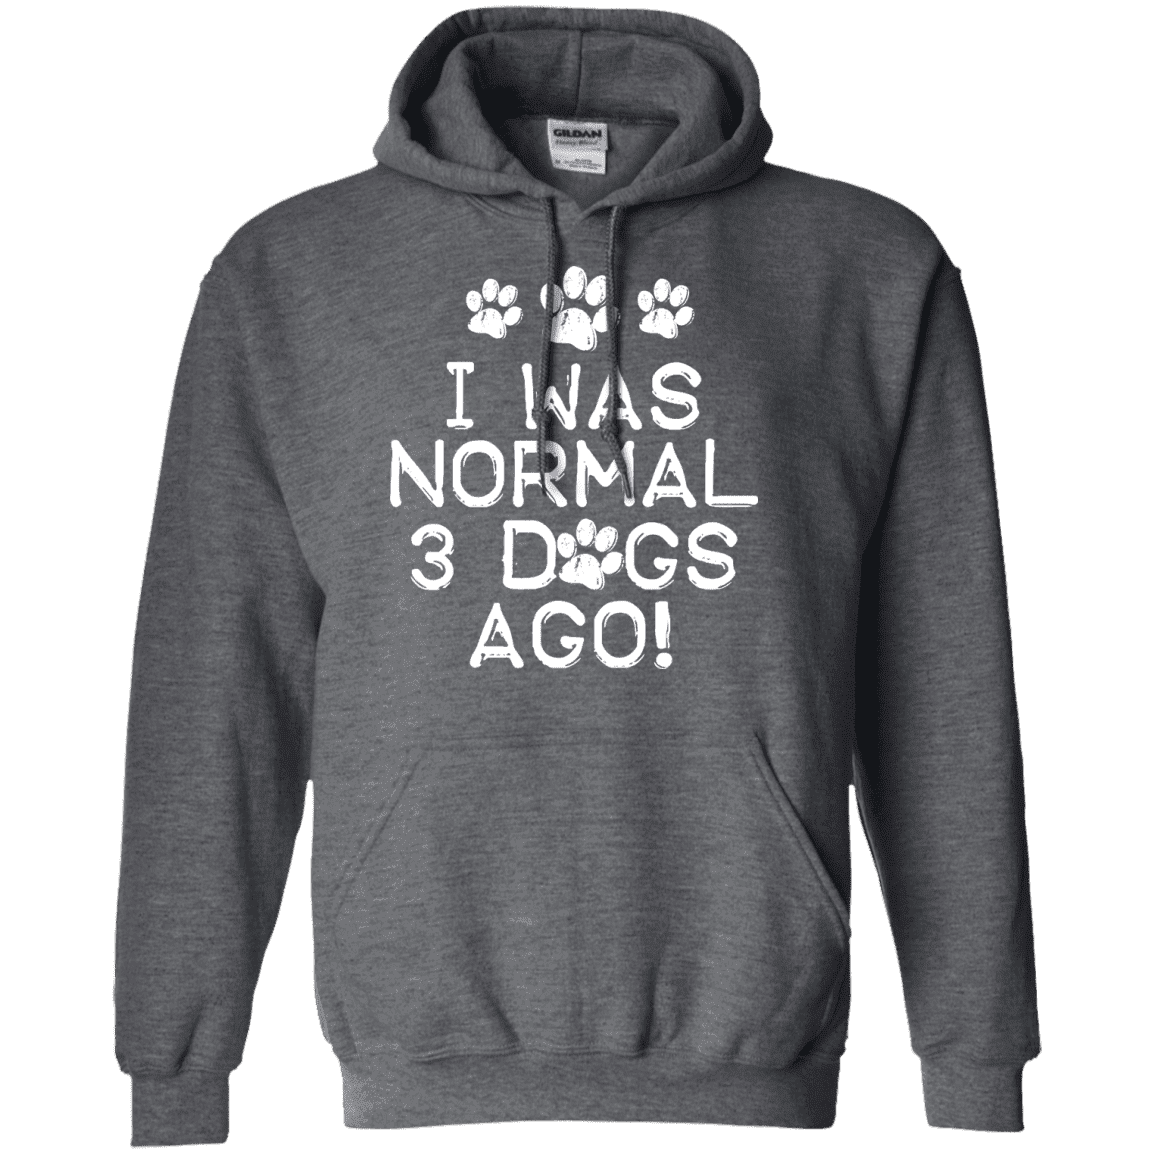 I Was Normal 3 Dogs Ago - Hoodie.